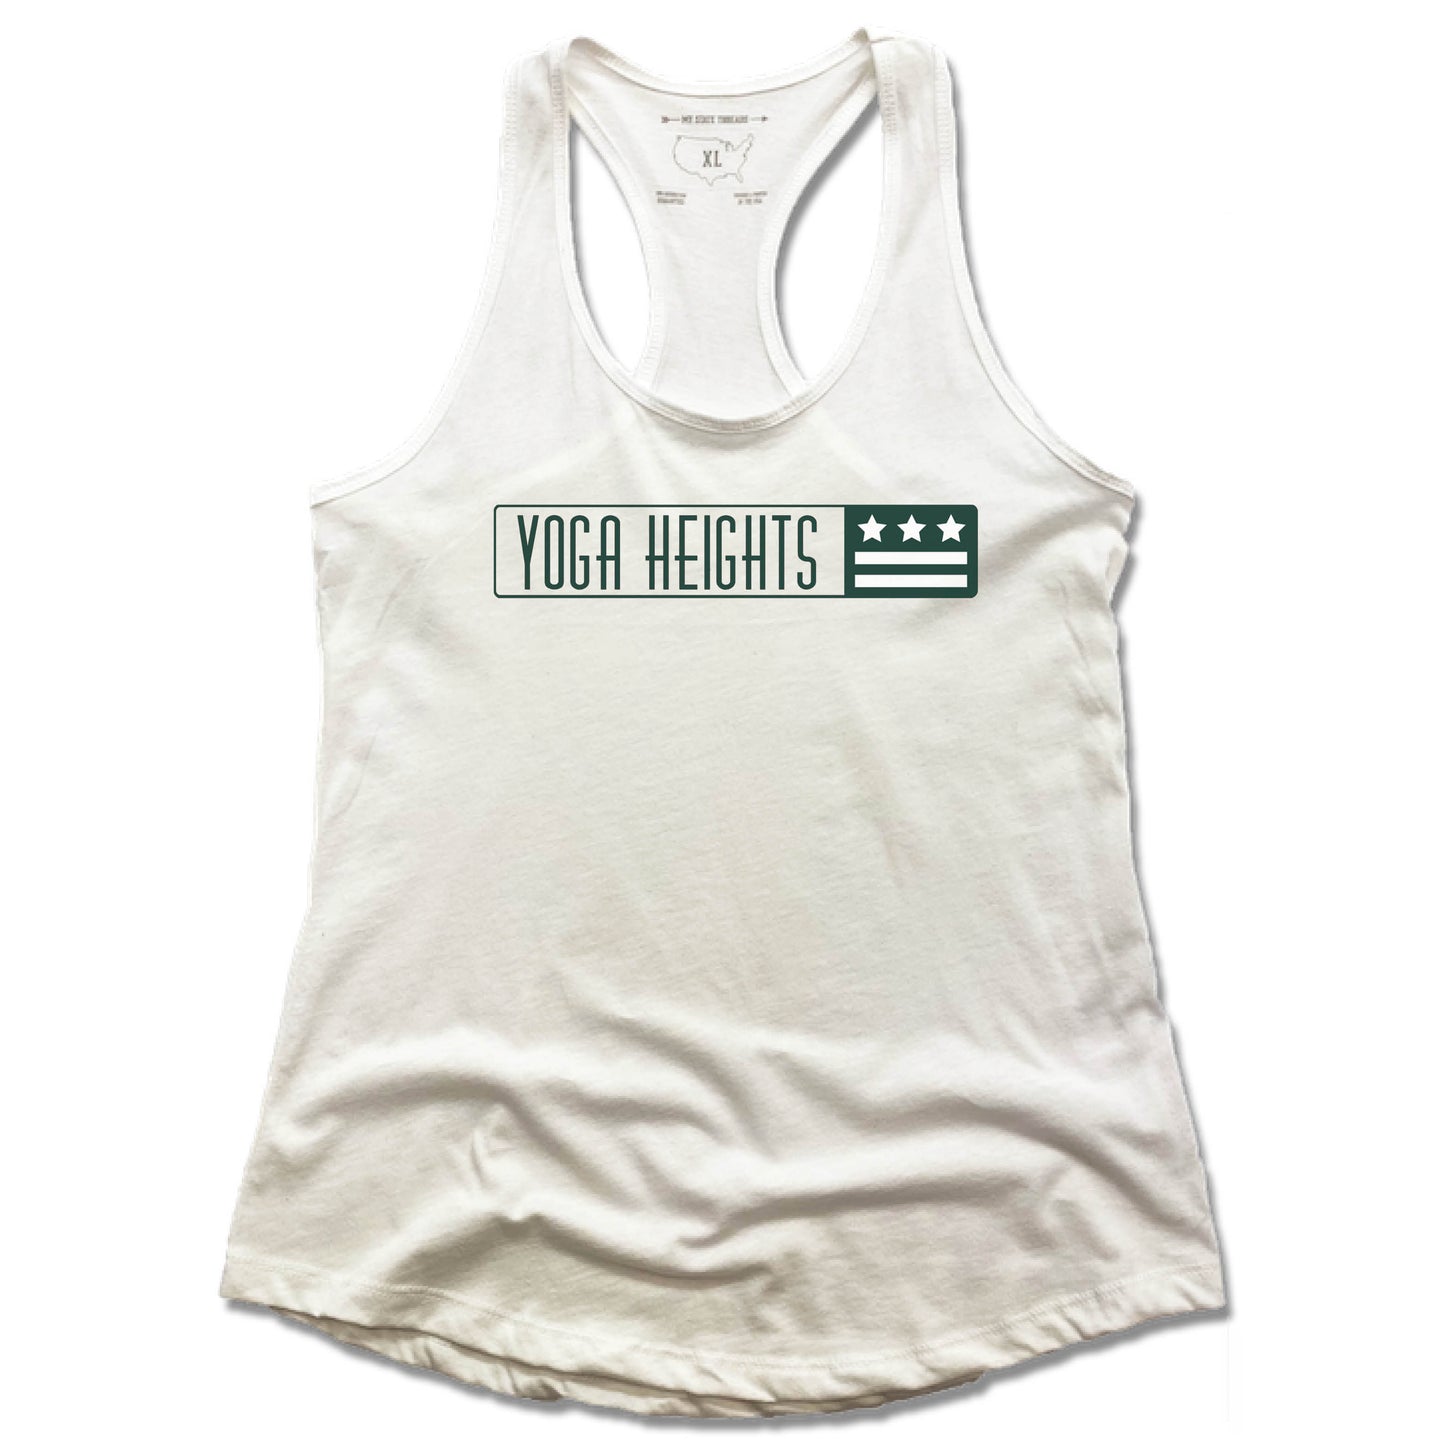 YOGA HEIGHTS | LADIES WHITE TANK | YH COLOR LOGO